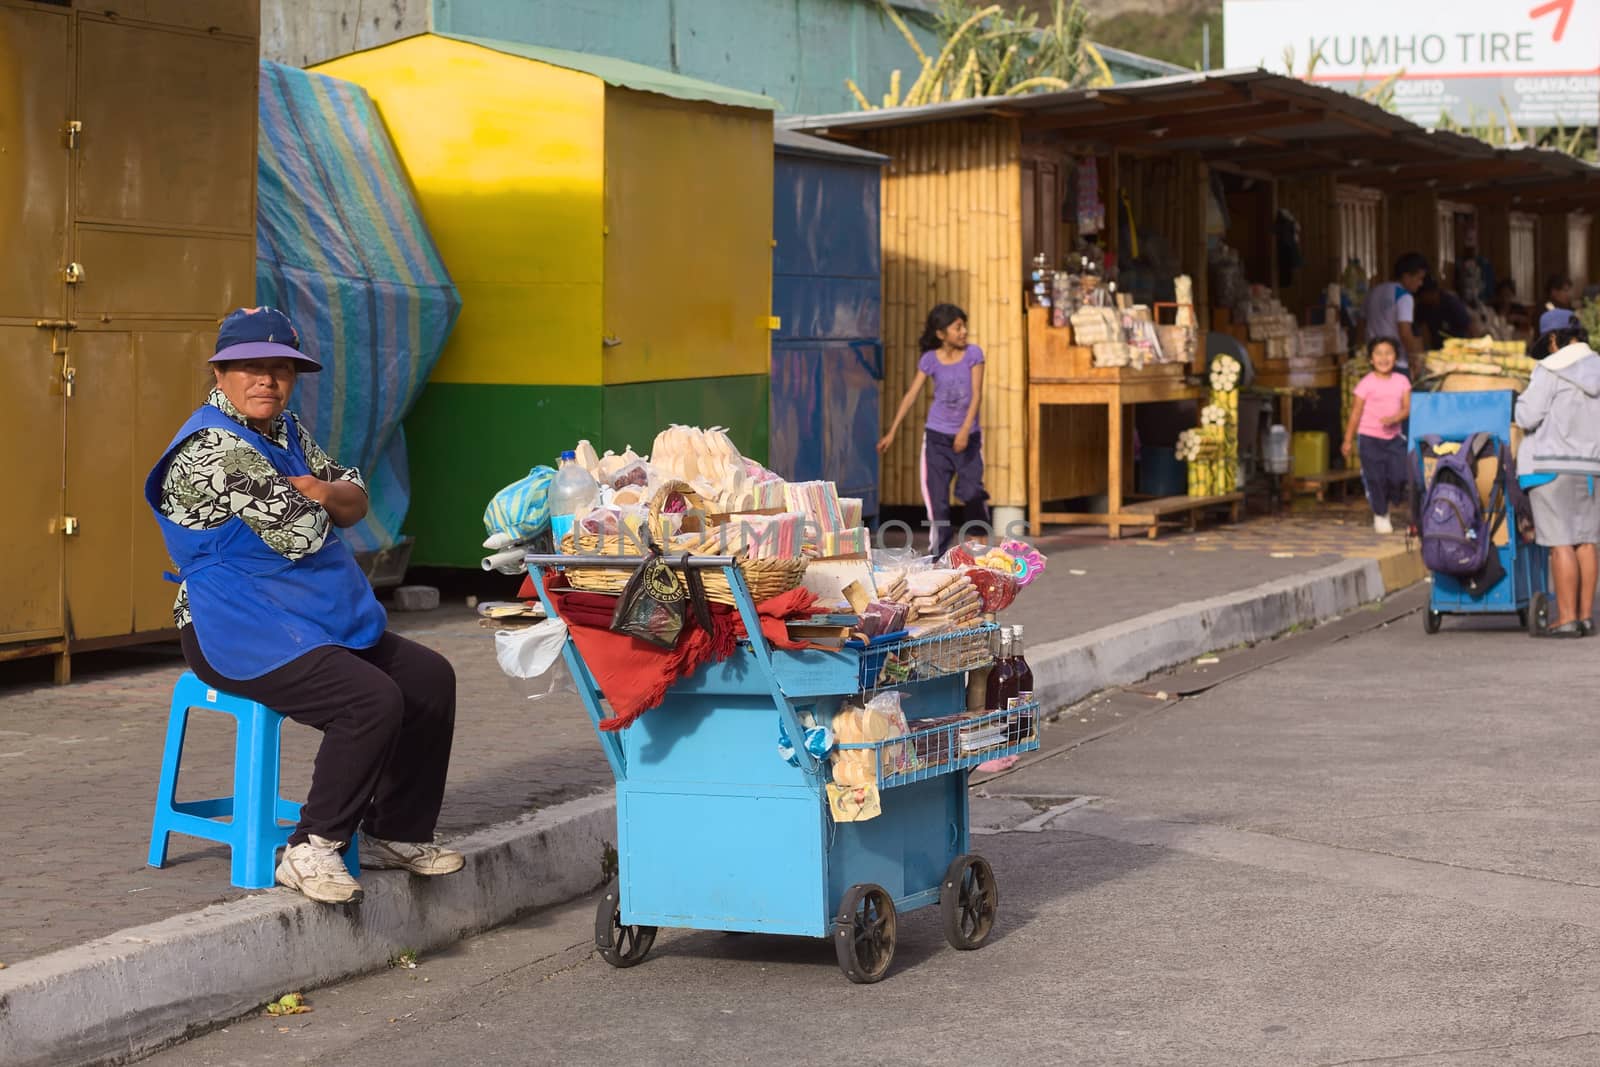 BANOS, ECUADOR - FEBRUARY 26, 2014: Unidentified woman selling sweets from a cart on Luis A. Martinez street on February 26, 2014 in Banos, Ecuador. She is selling also melcocha, a traditional taffy from Banos made of sugarcane. 